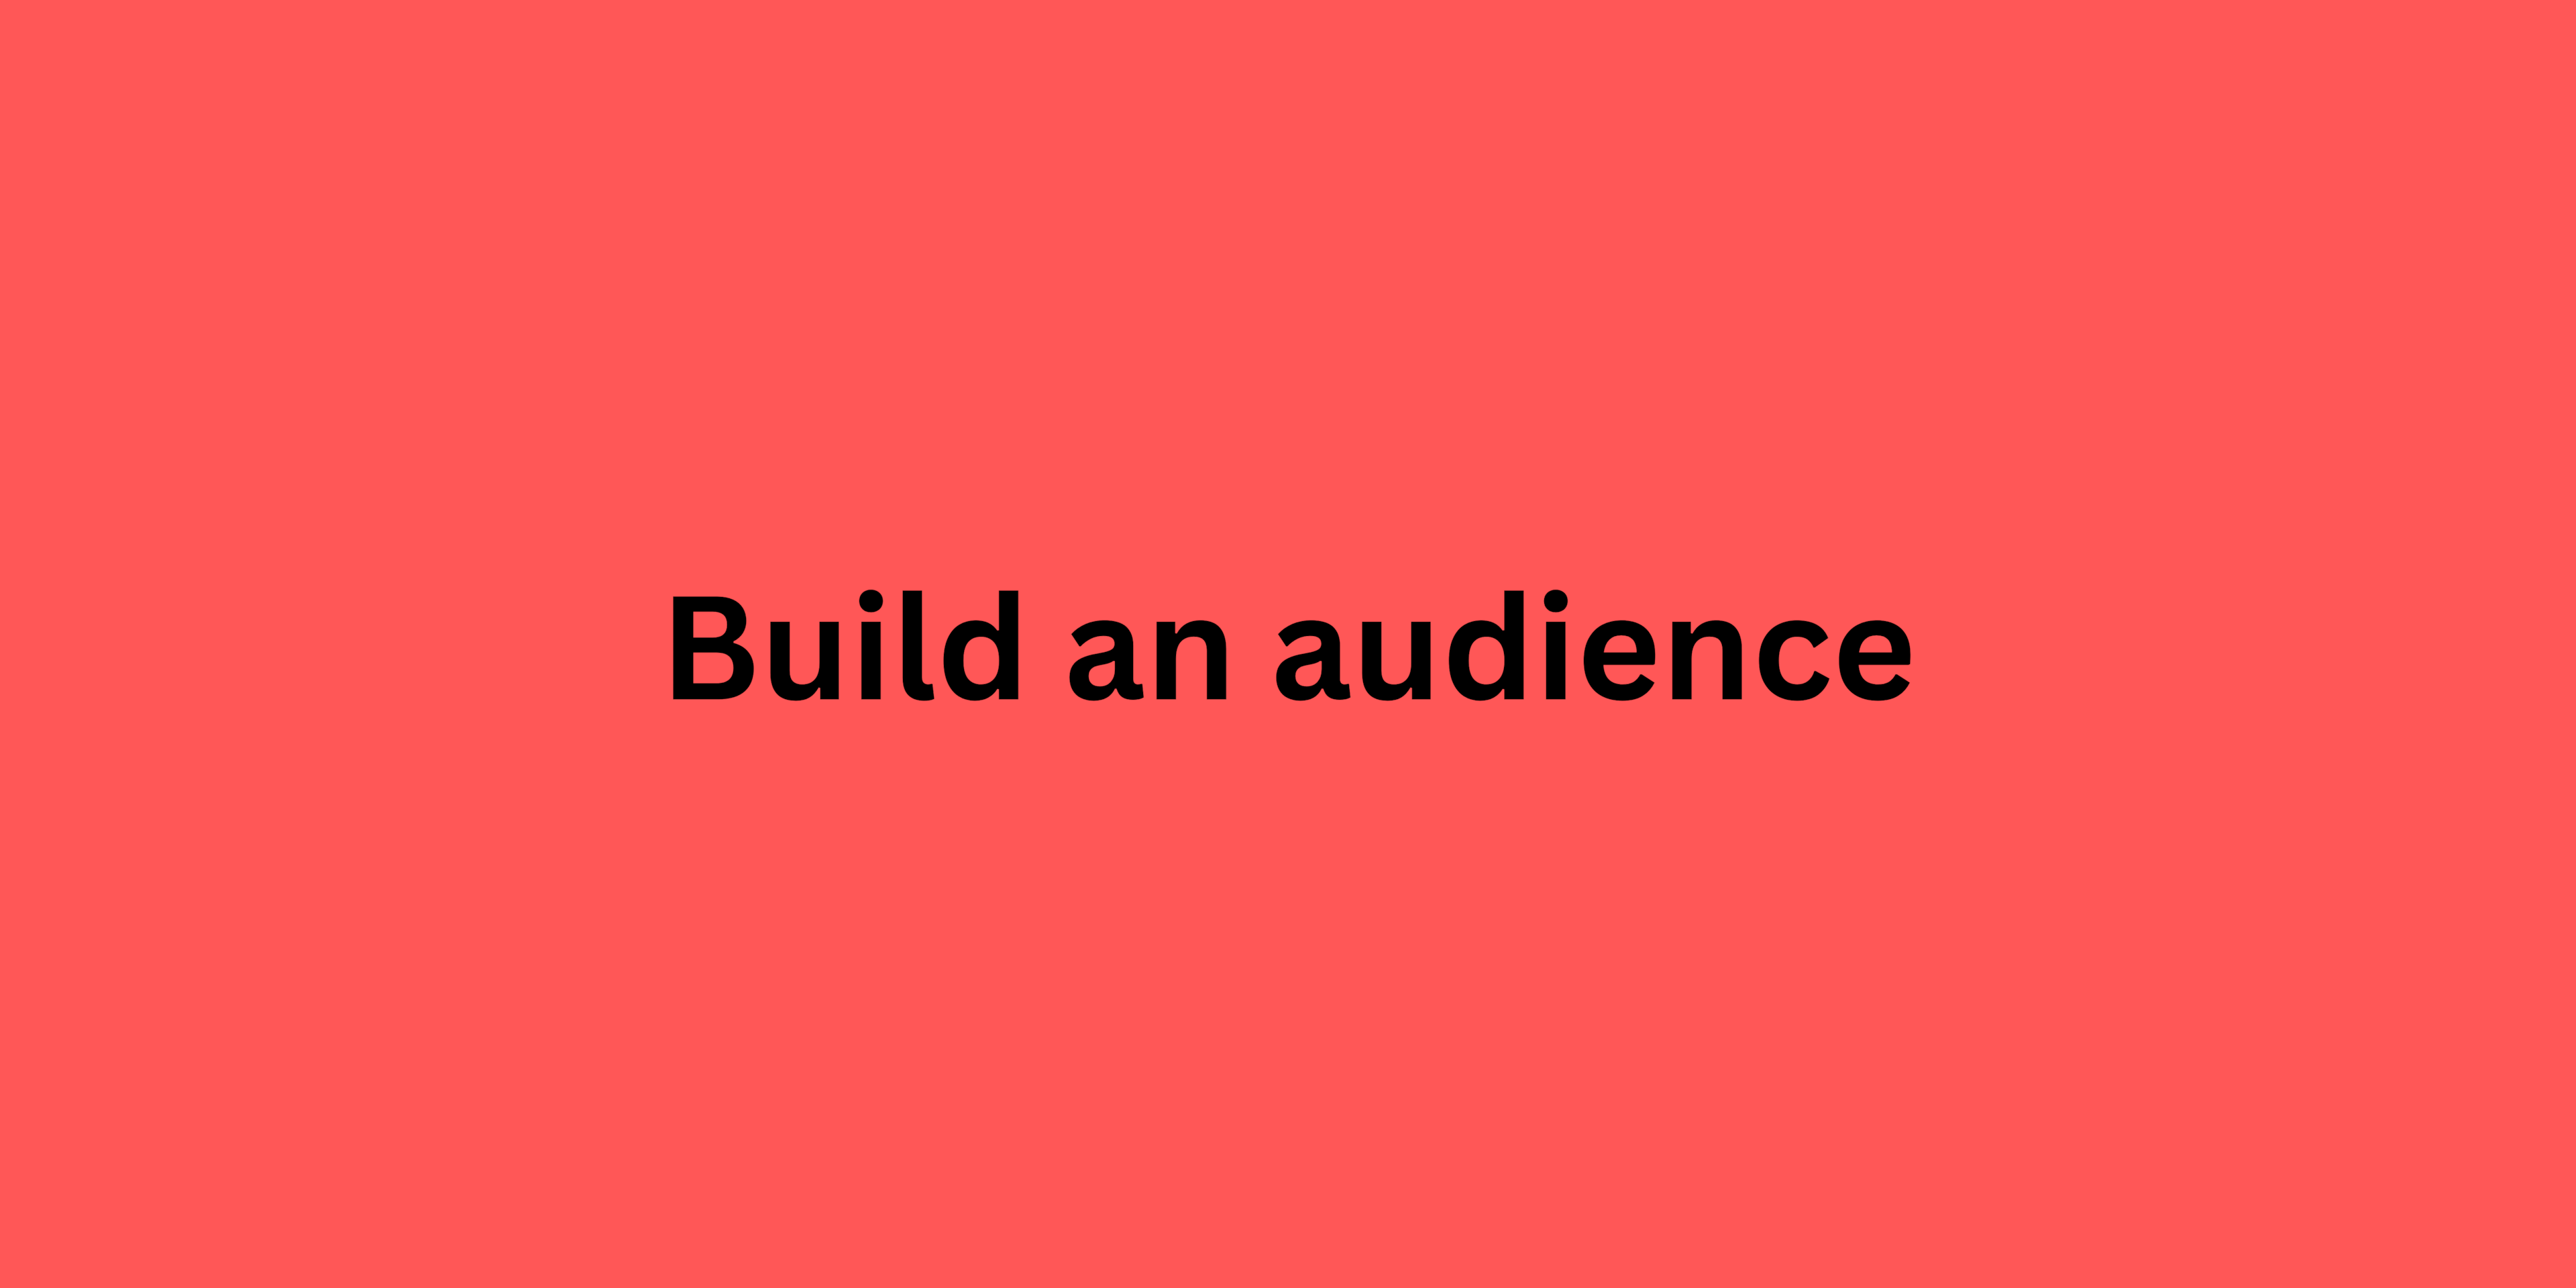 Build an audience